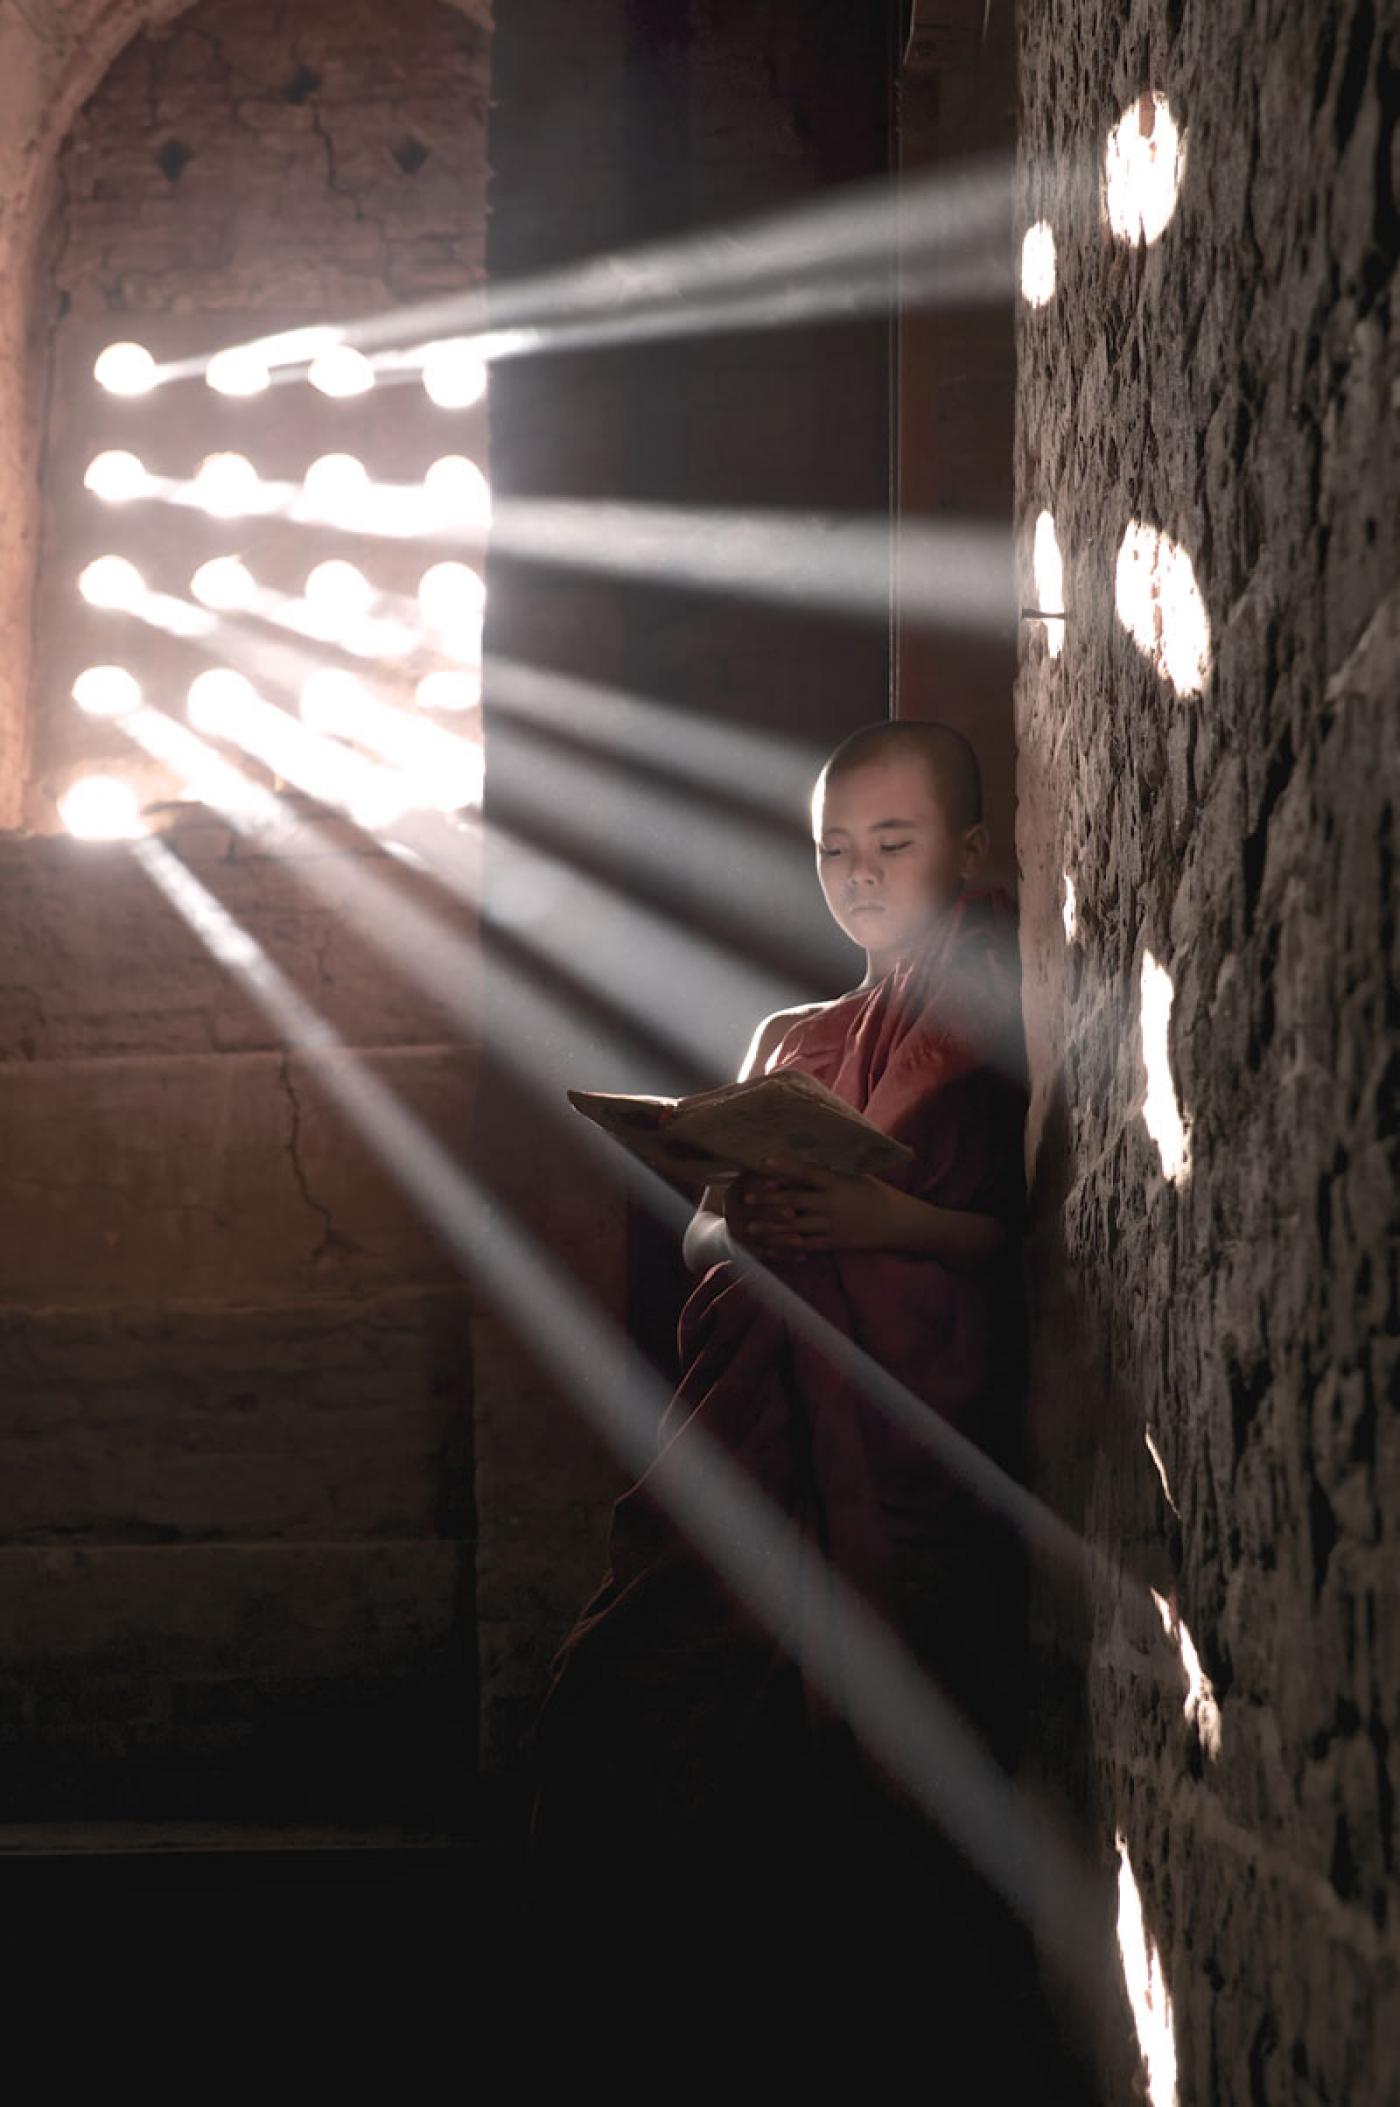 Bagan, Myanmar. Rays of light pierce through a nearby window falling on a novice Buddhist Monk and his book.